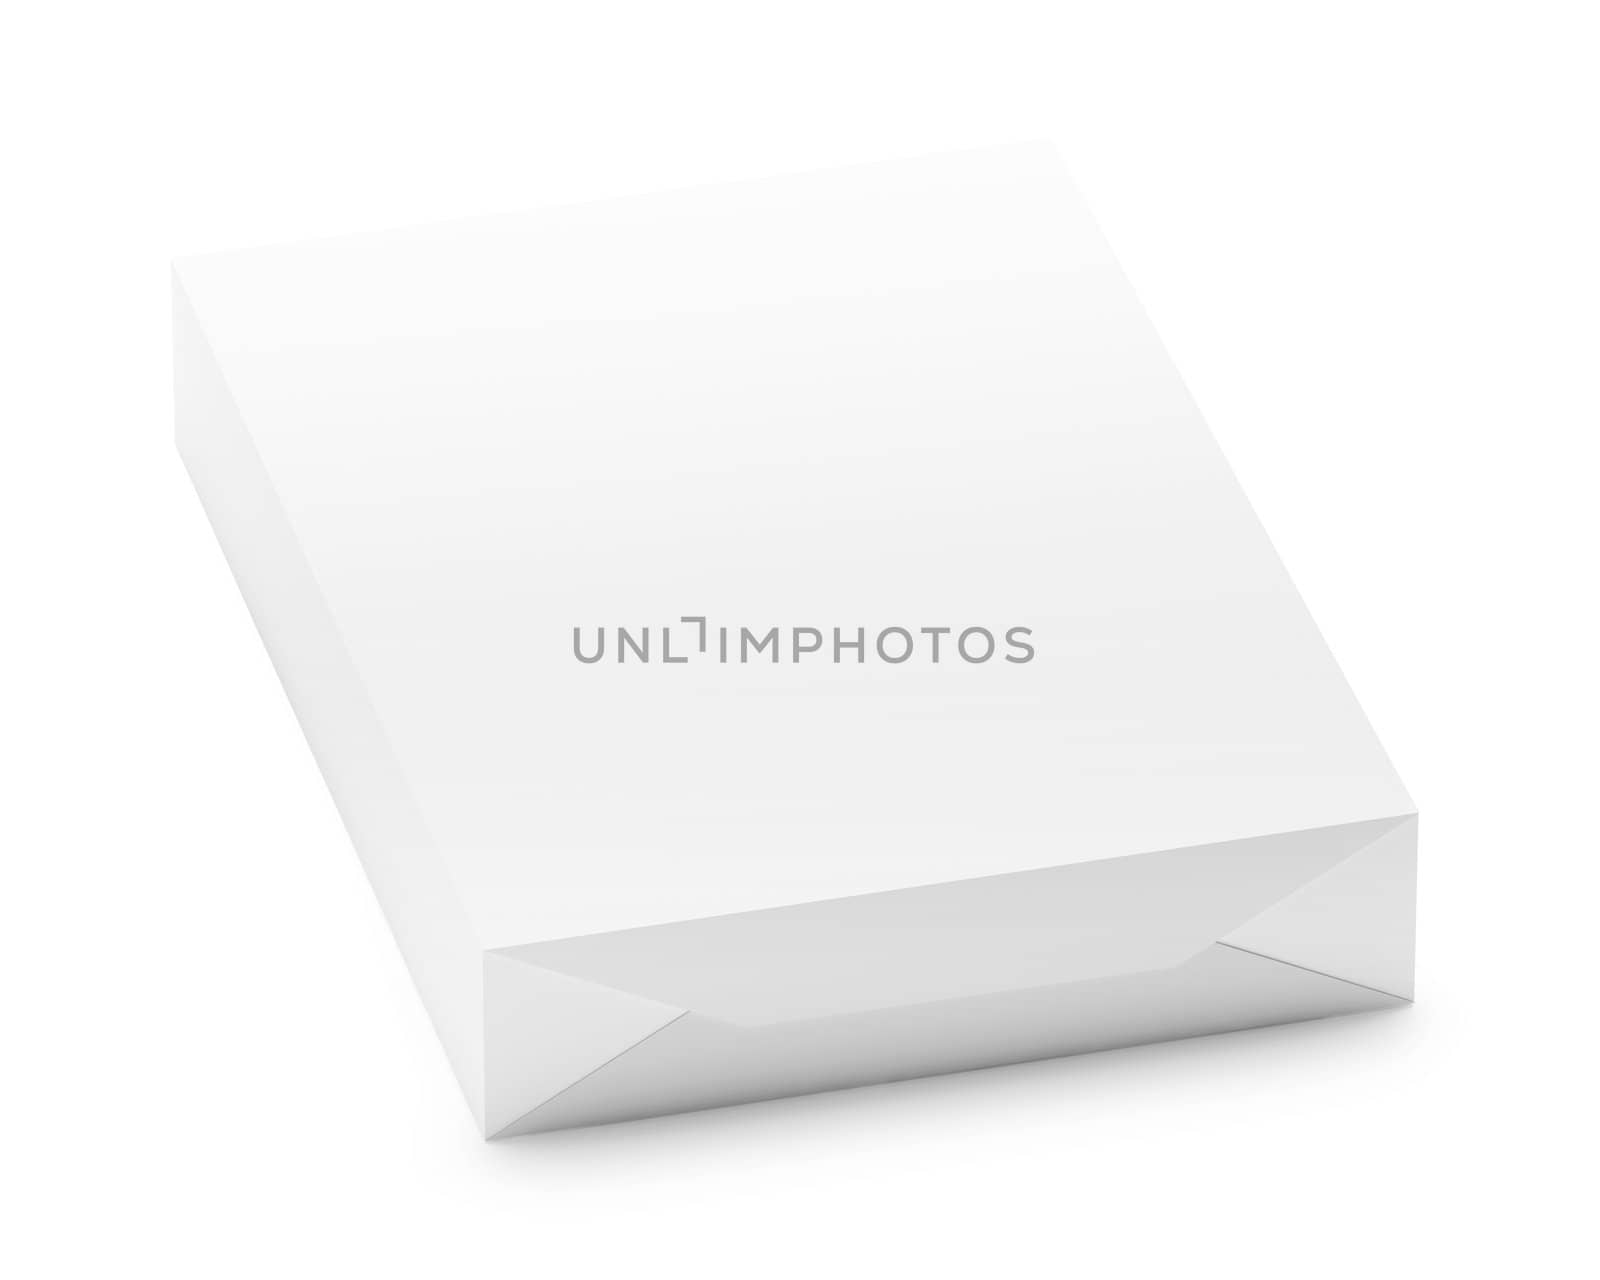 Paper Box. This image contains clipping path for easy background removing.